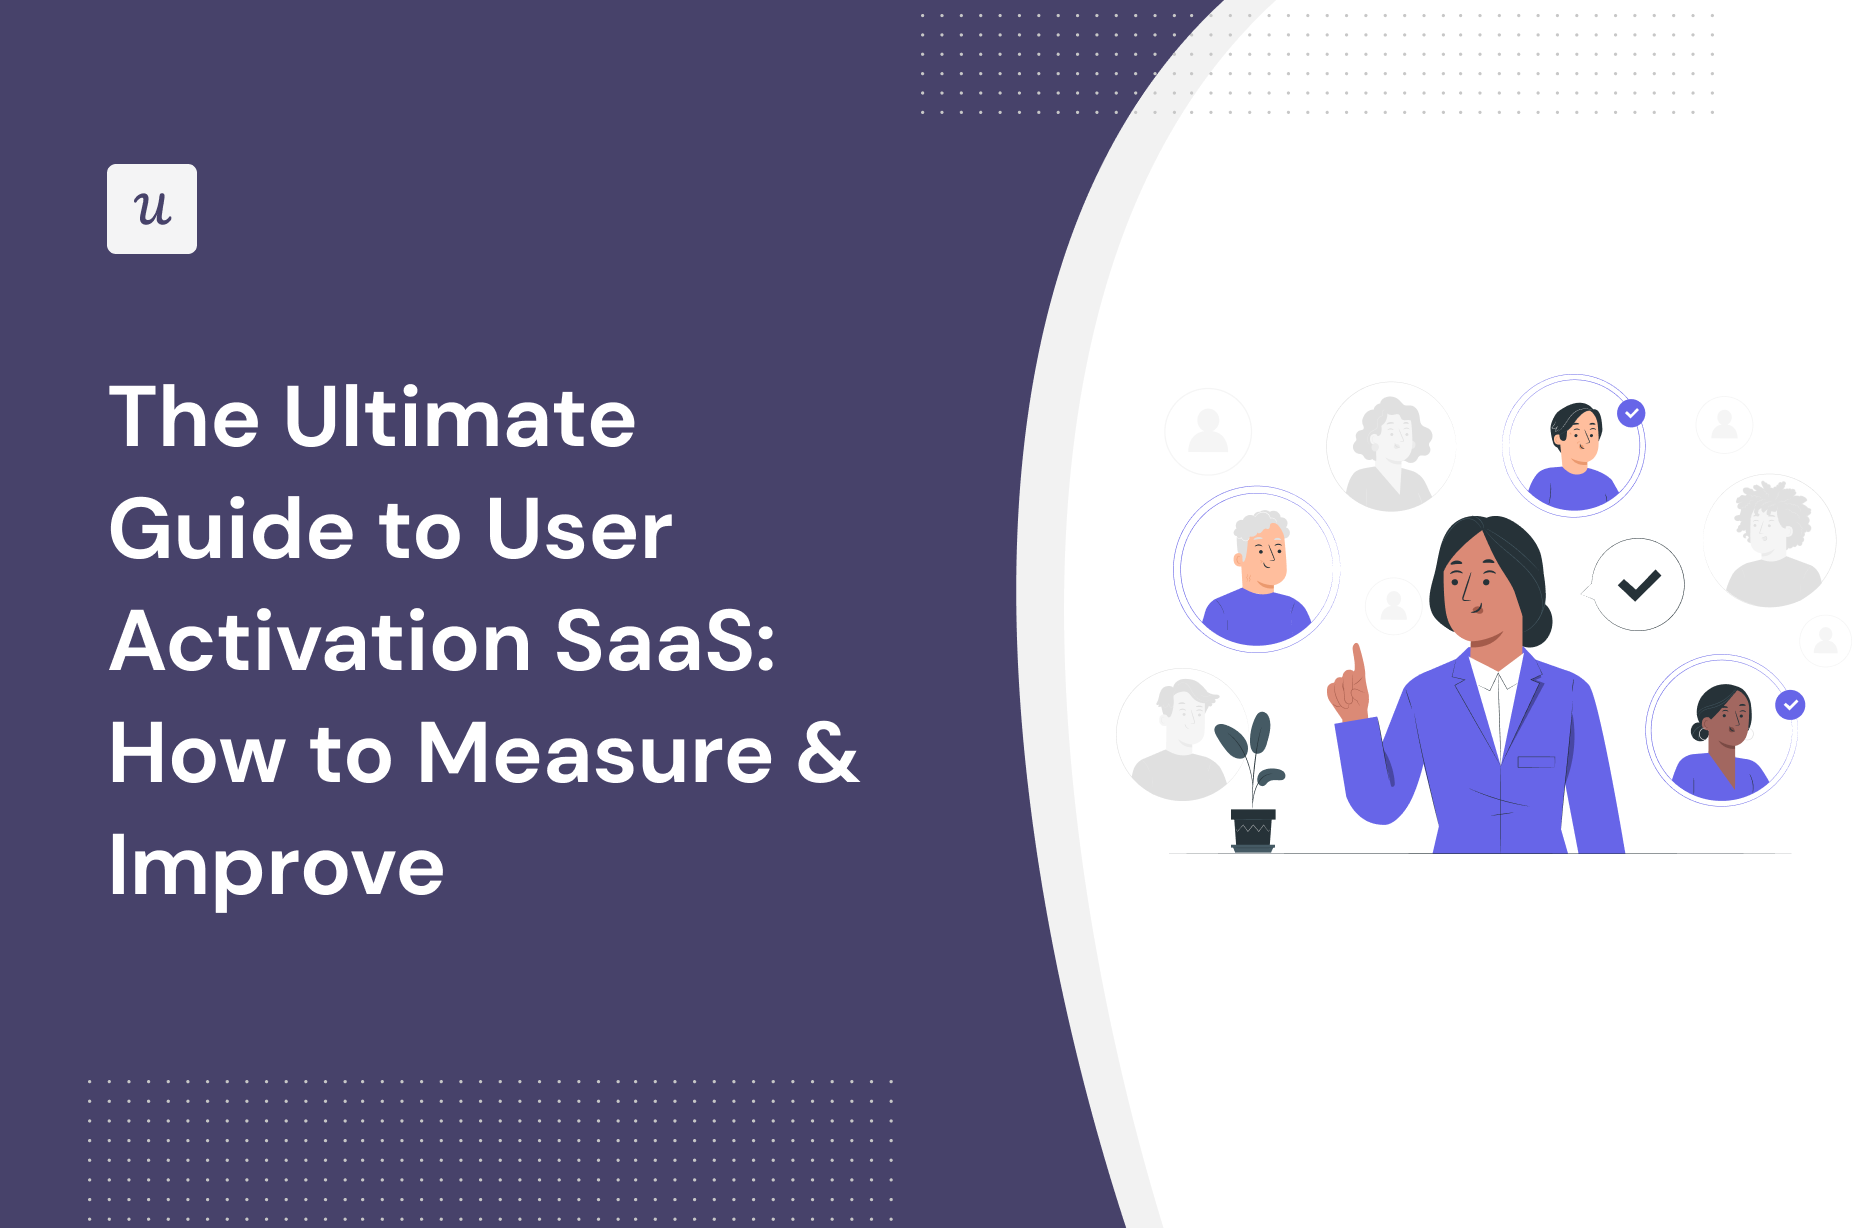 The Ultimate Guide to User Activation SaaS: How to Measure & Improve